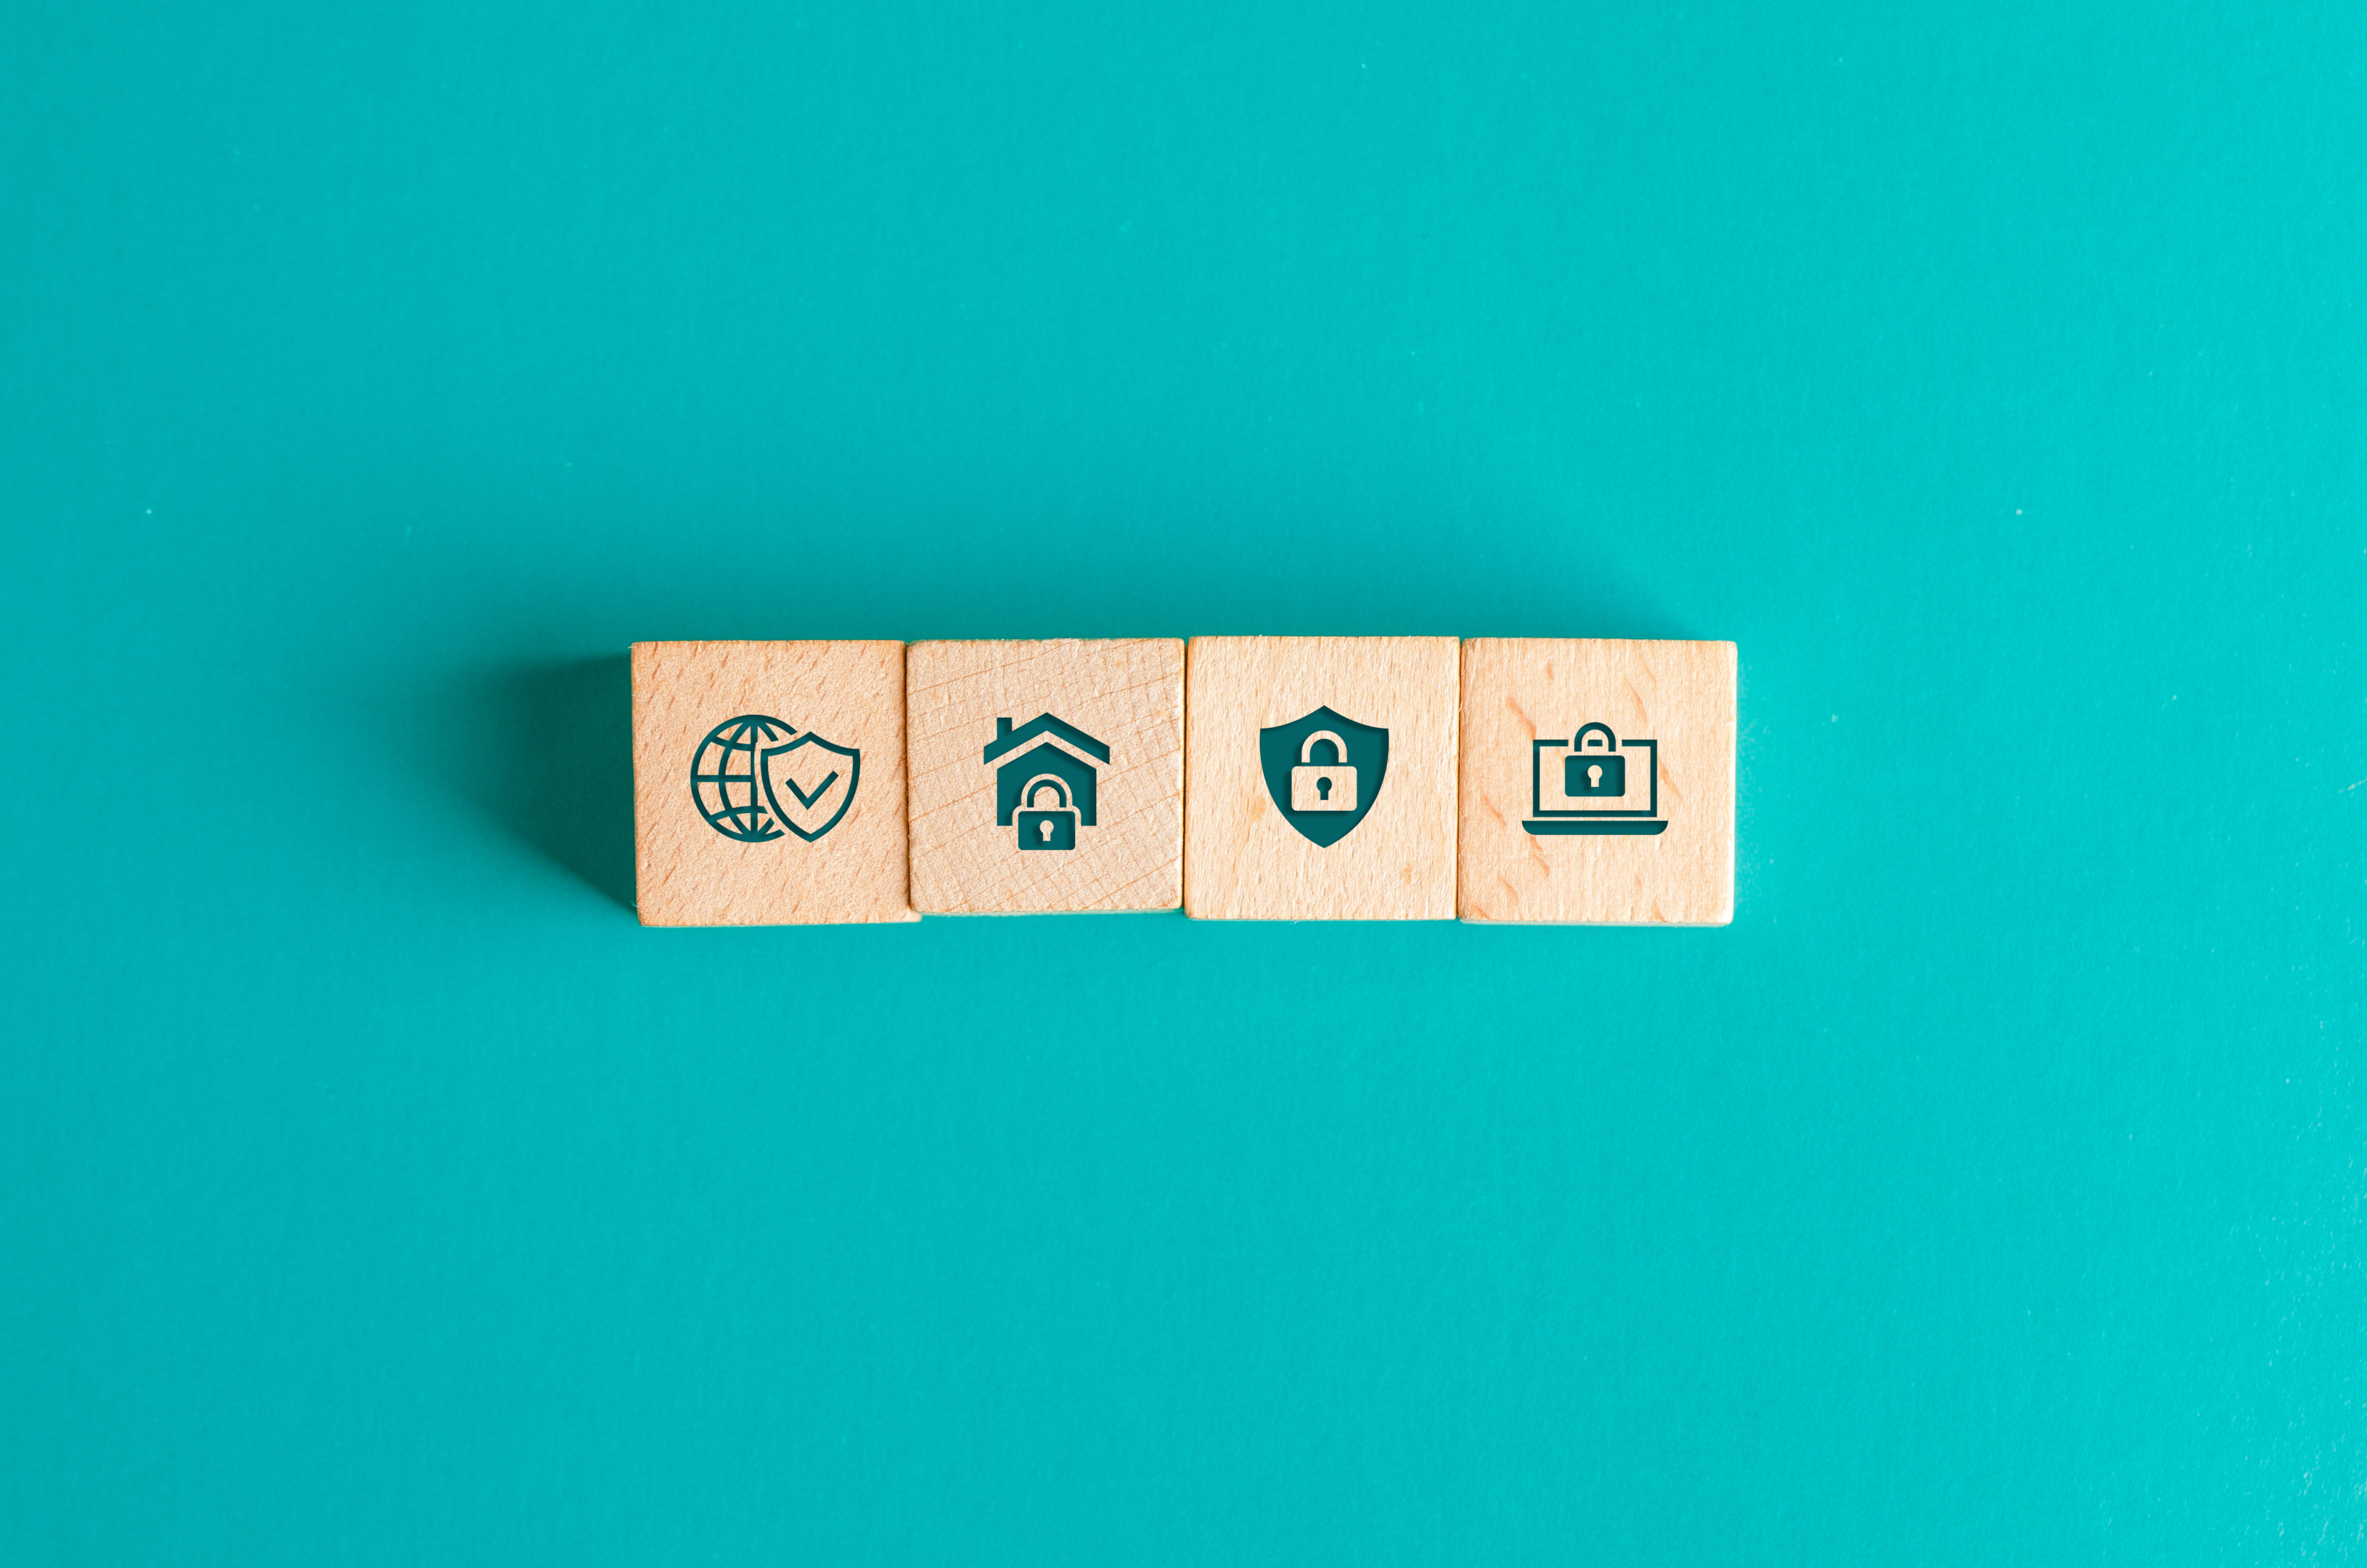 The image depicts icons symbolizing cybersecurity frameworks